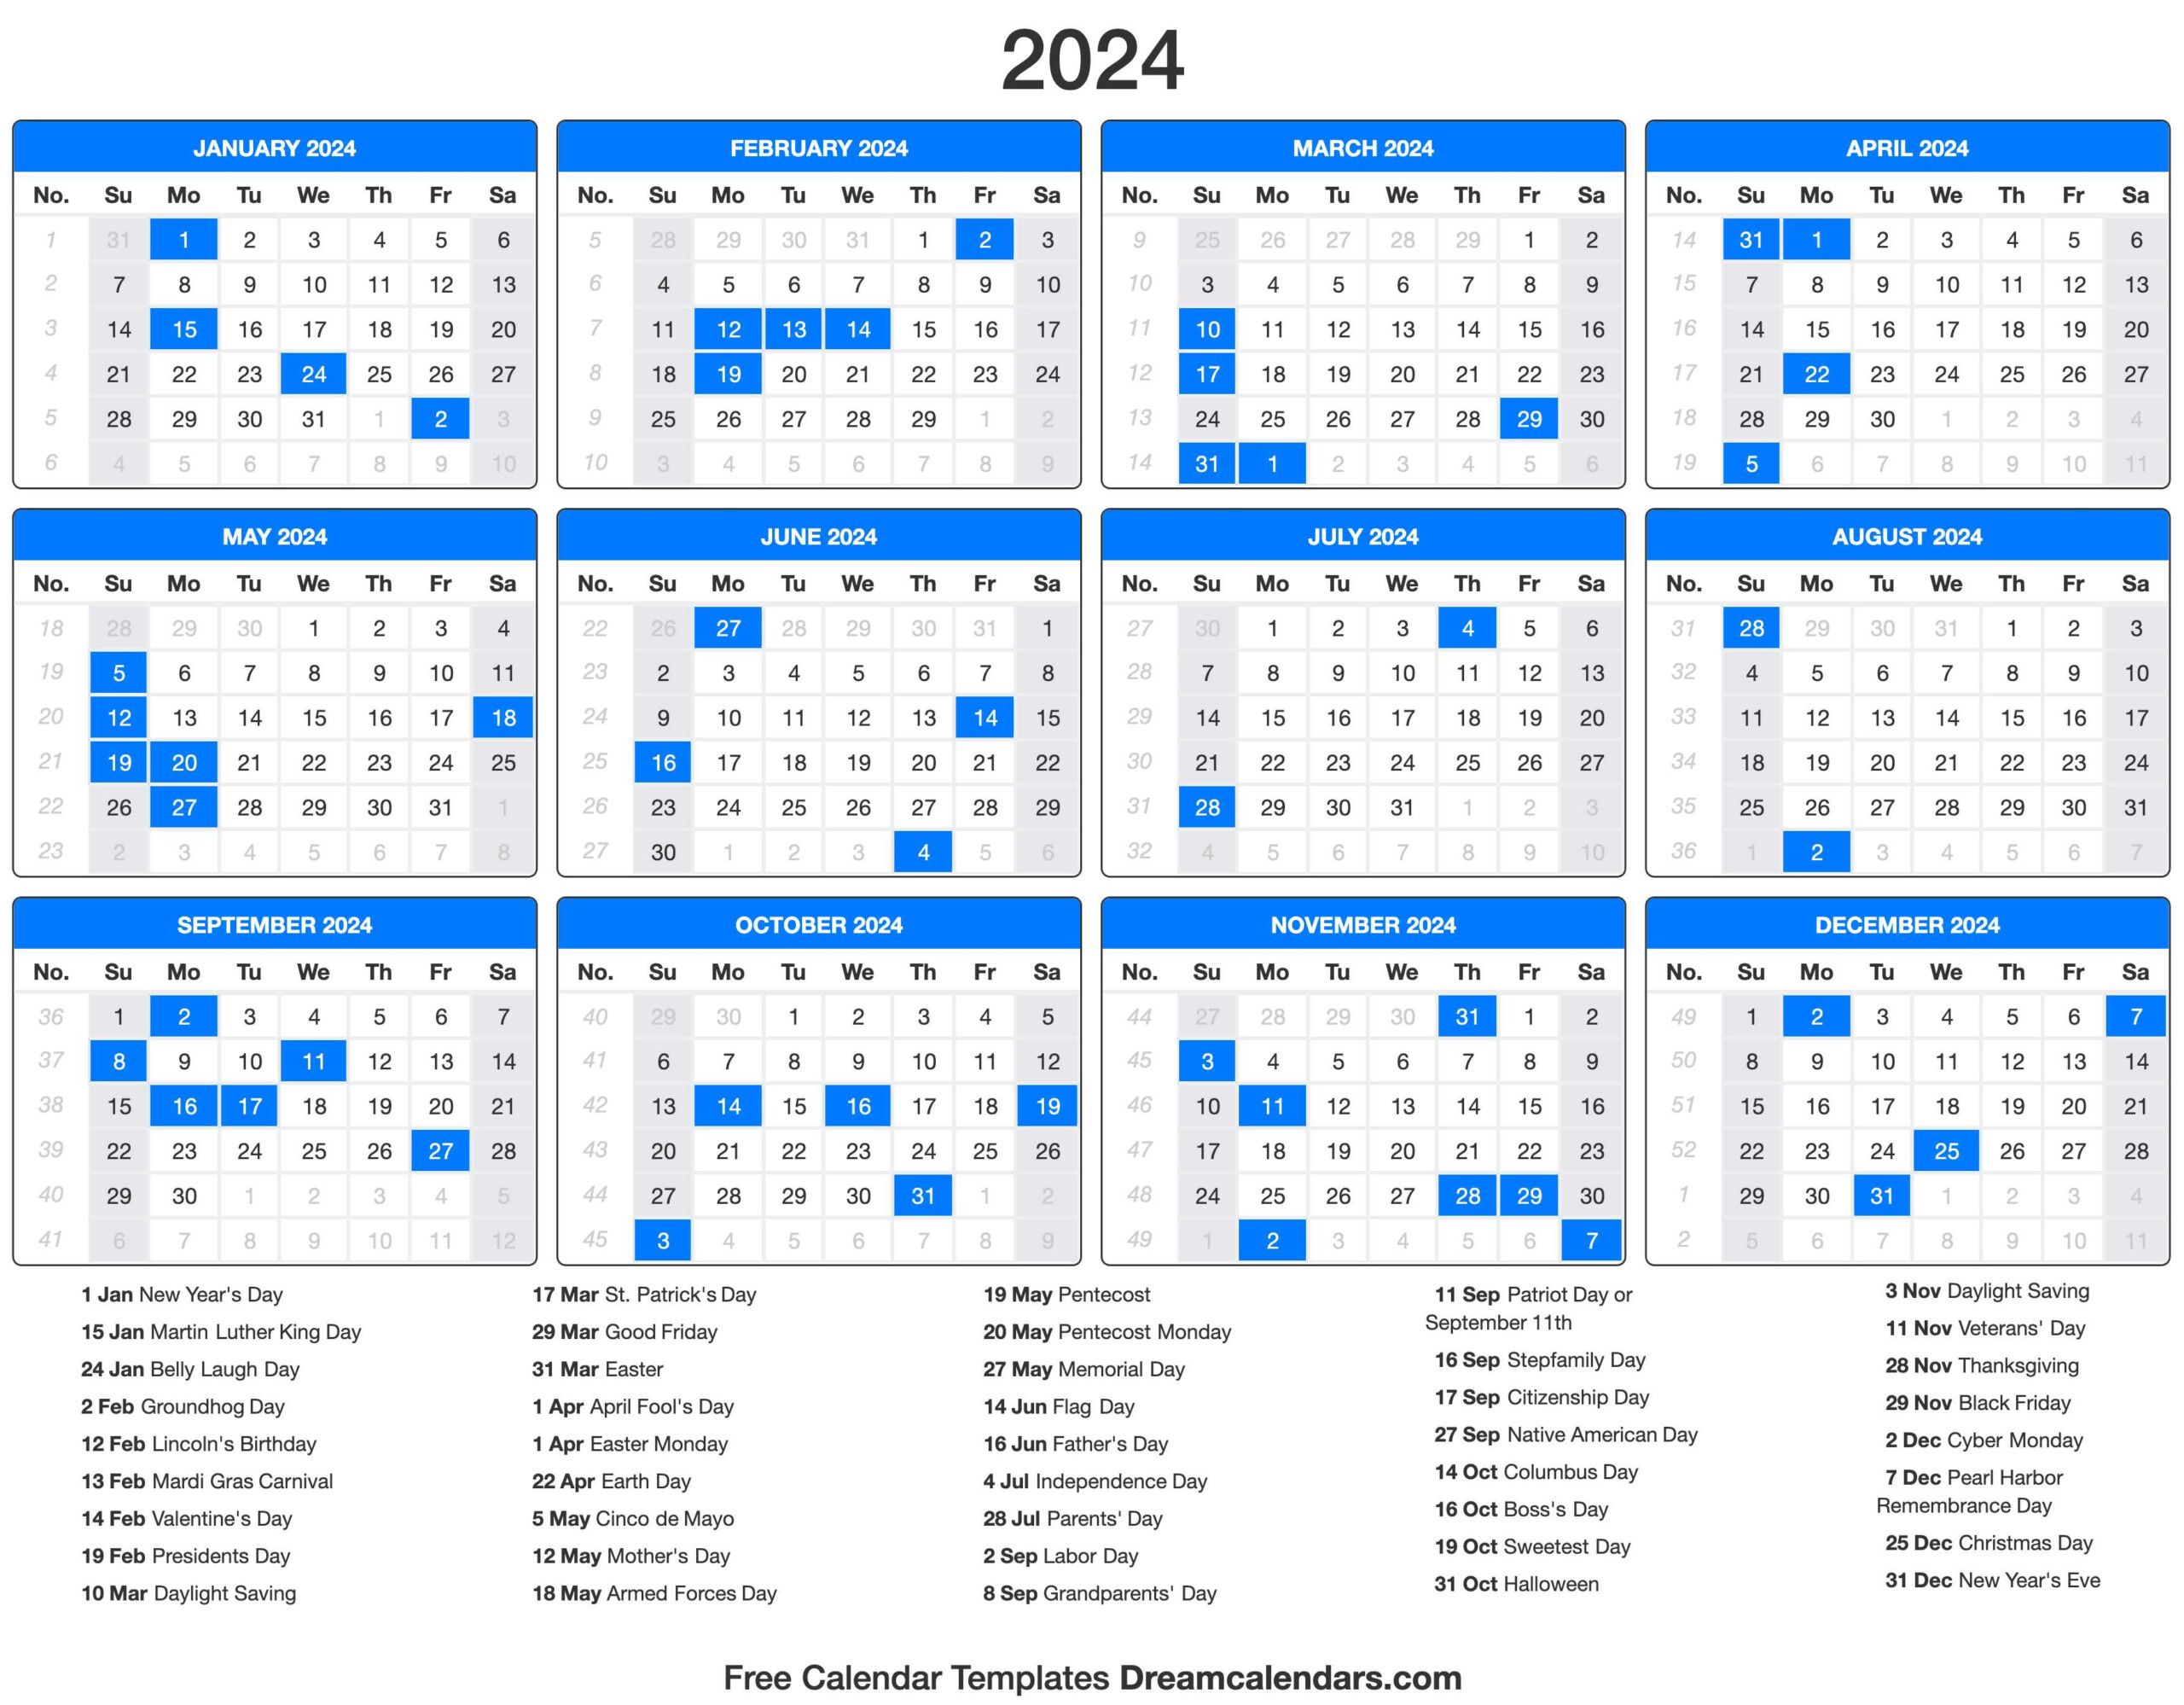 Create Your Personalized 2024 Calendar With Holidays And Festivals